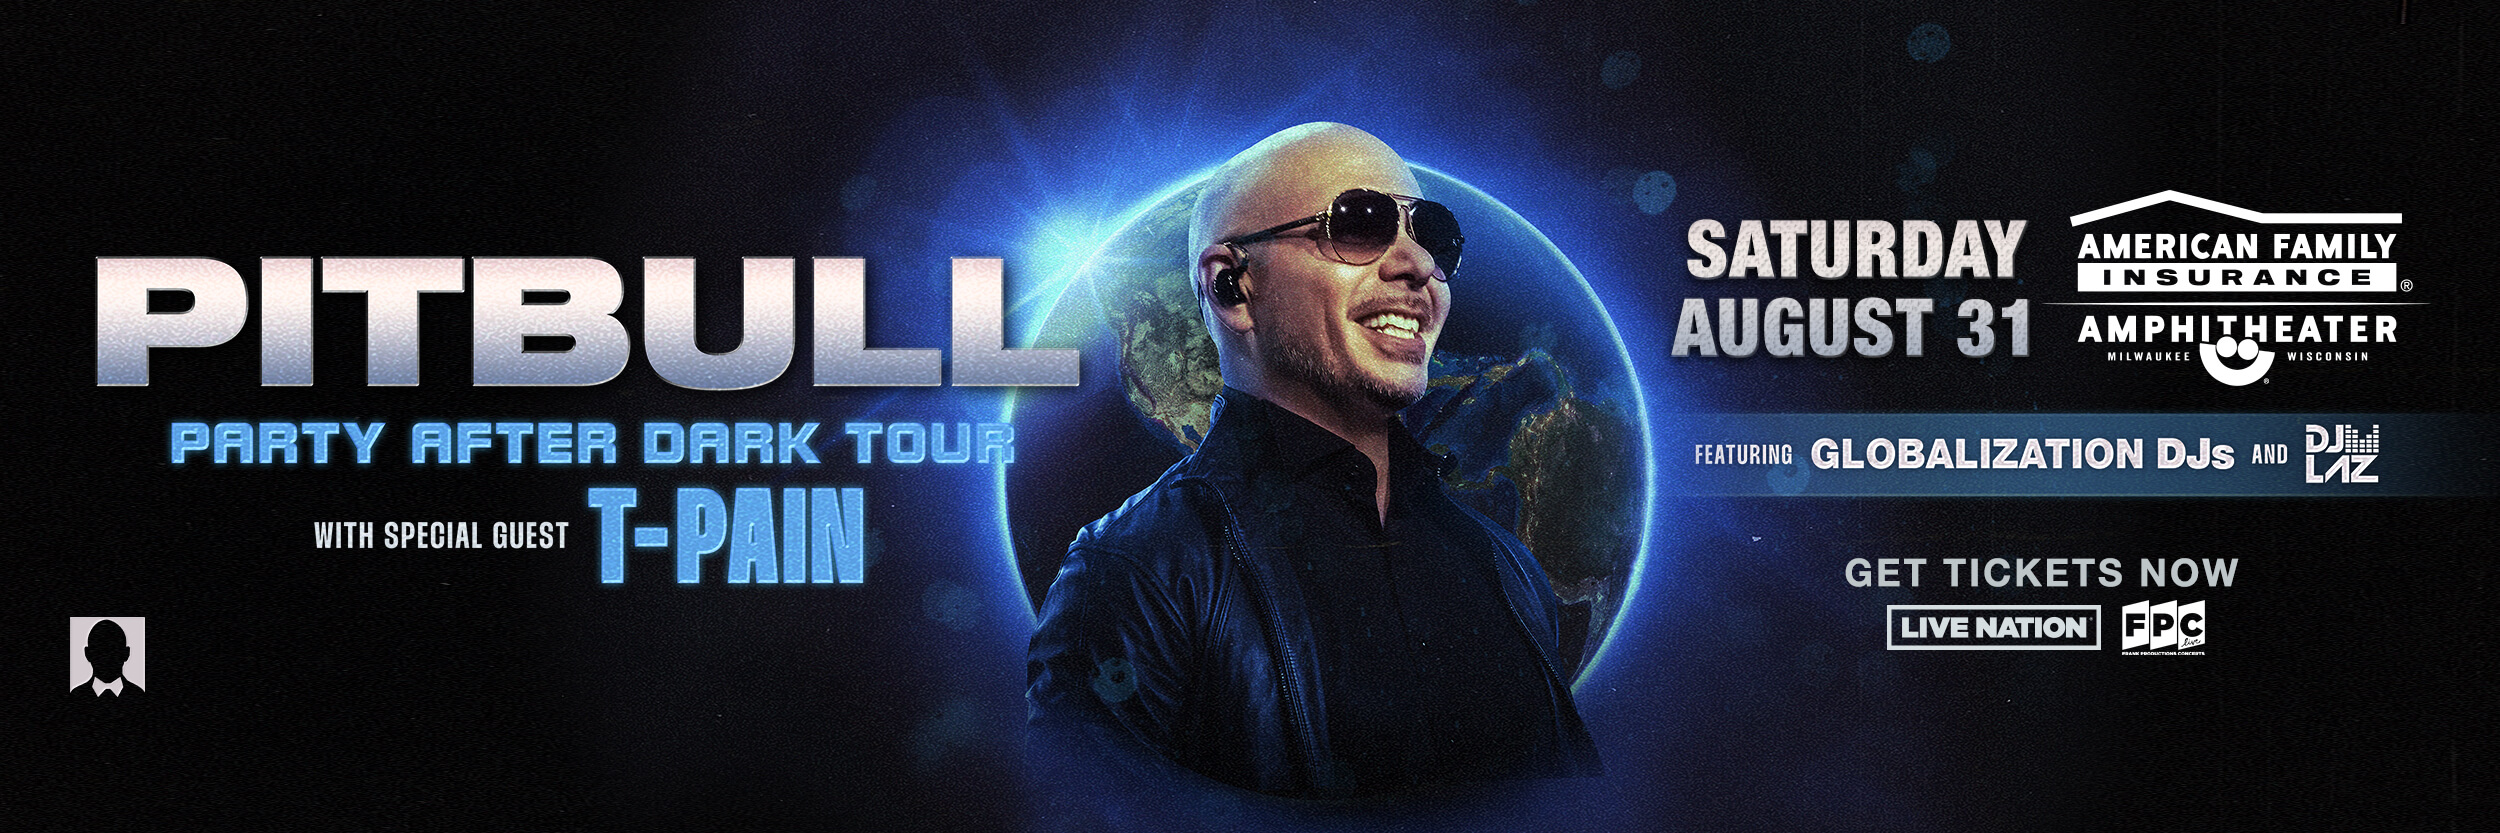 Pitbull - Party After Dark Tour with special guest T-Pain